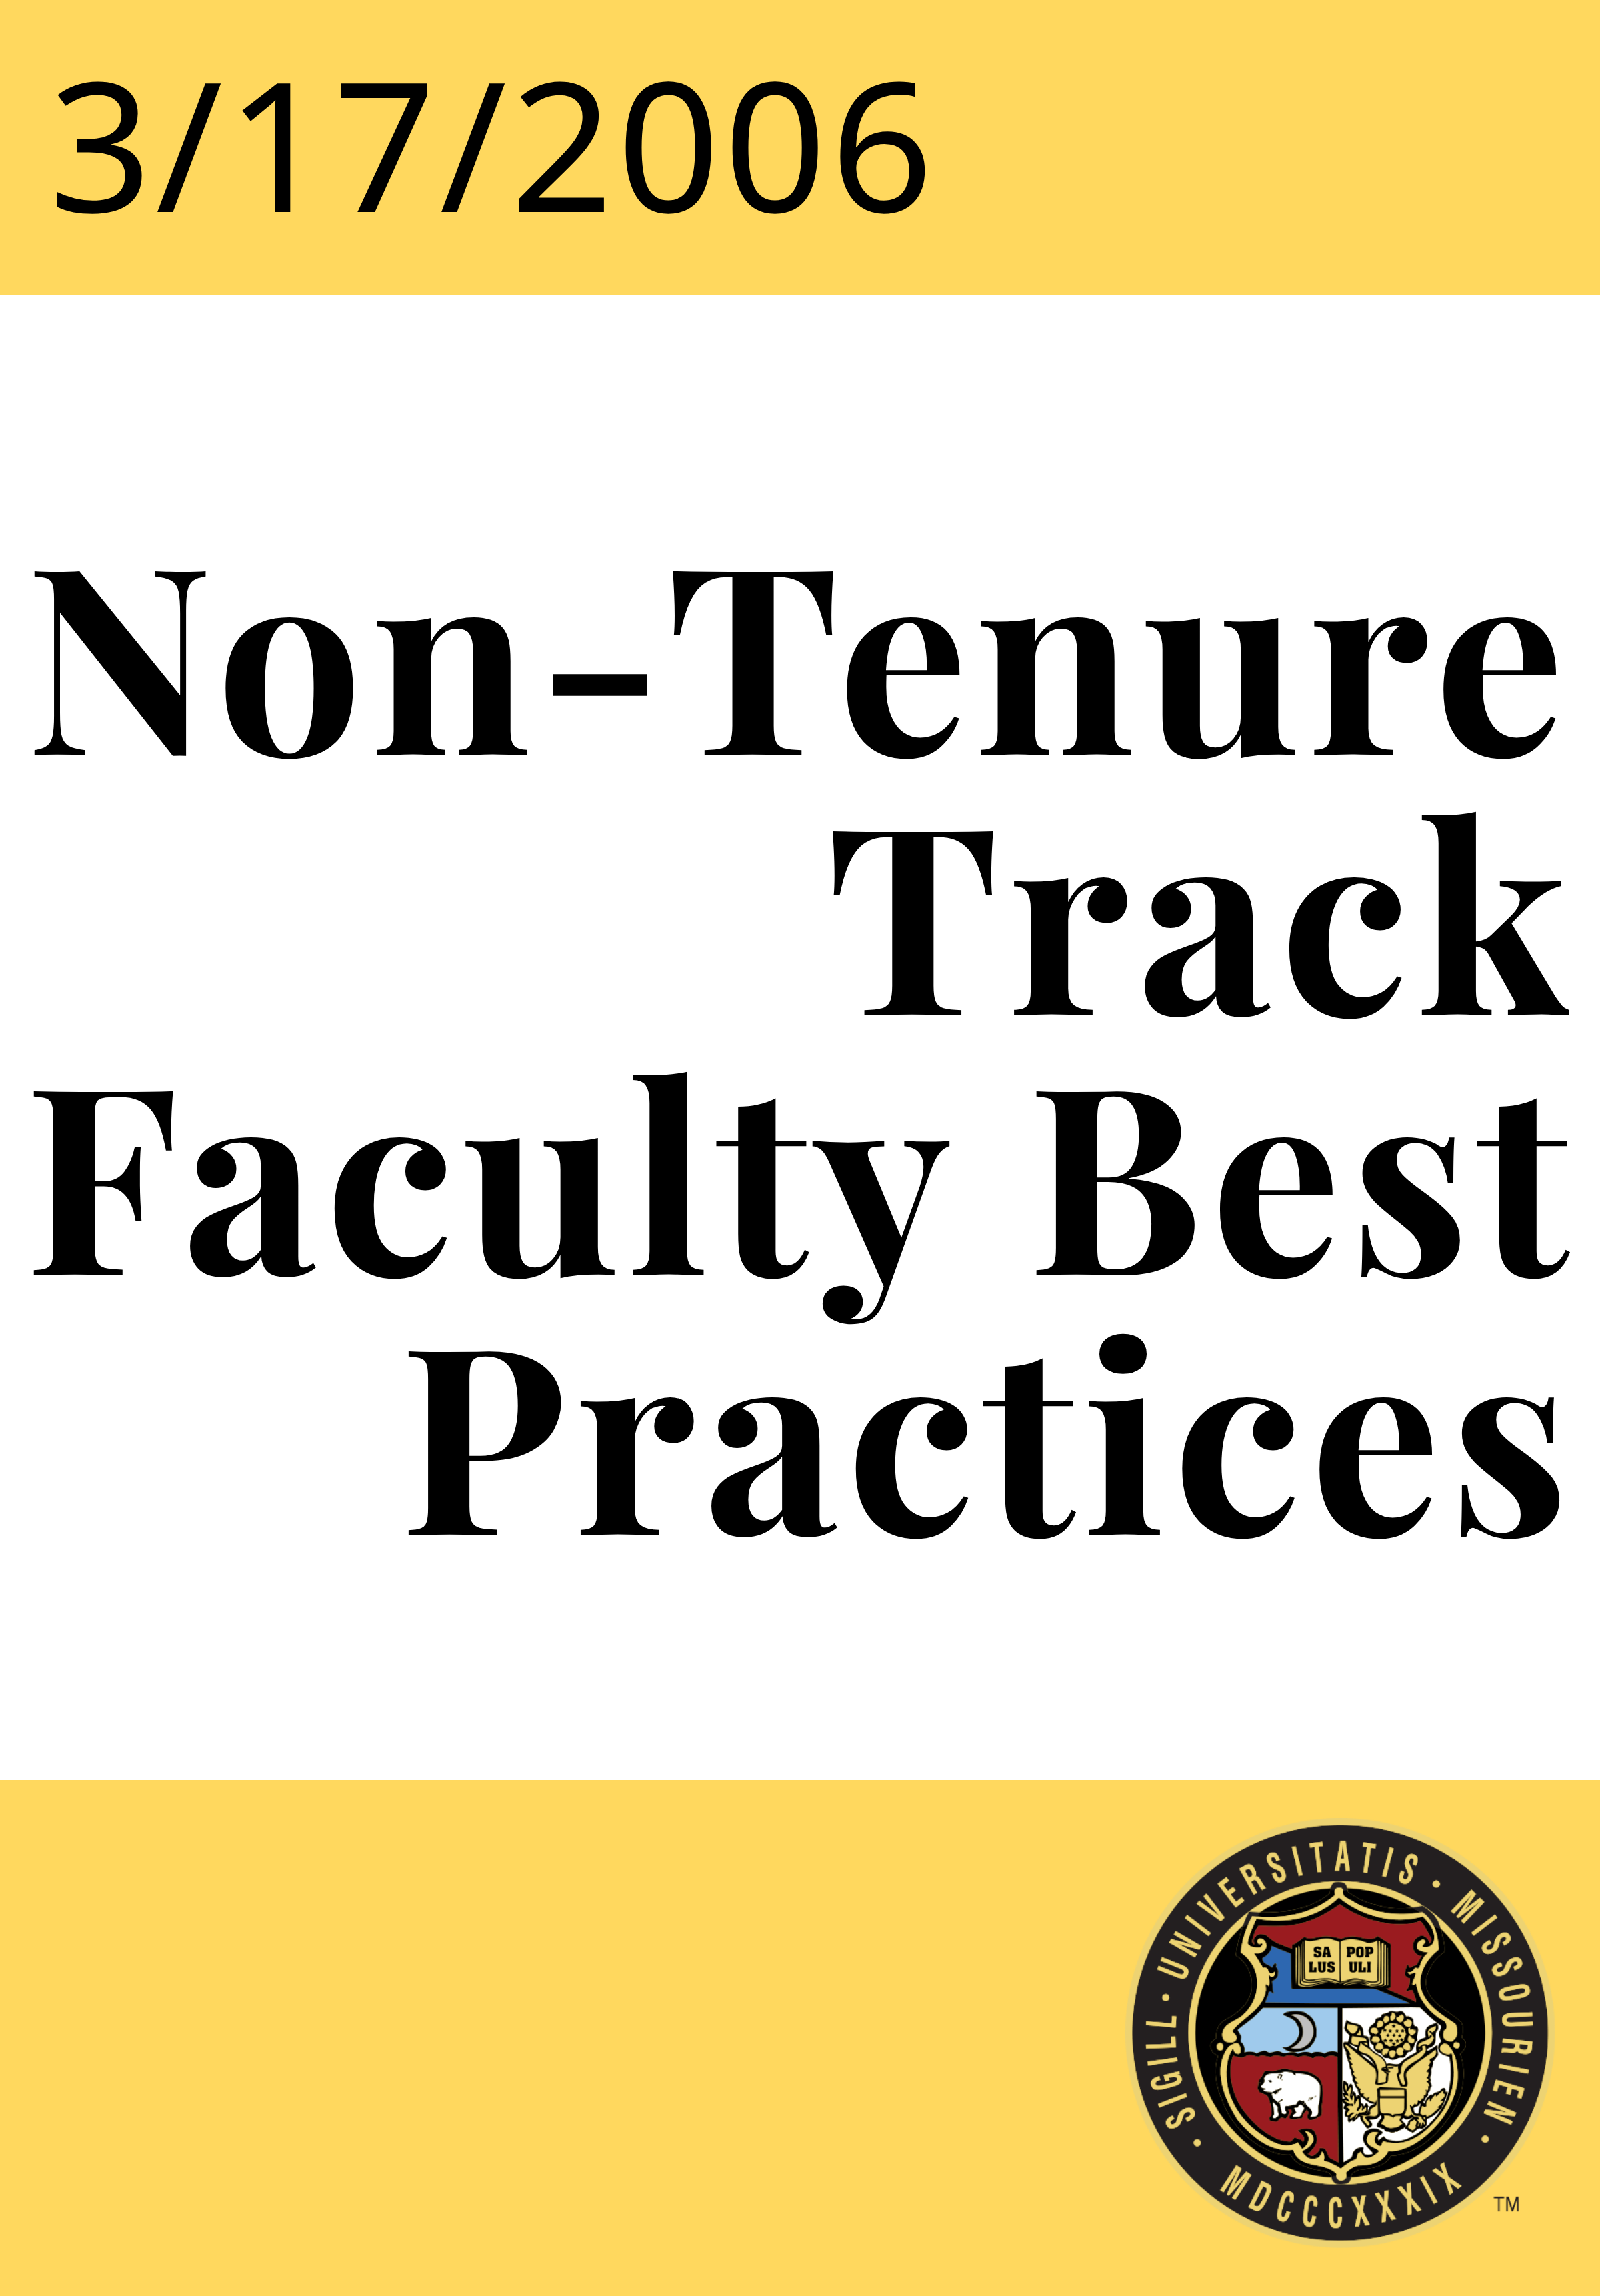 Non-Tenure Track Faculty Best Practices